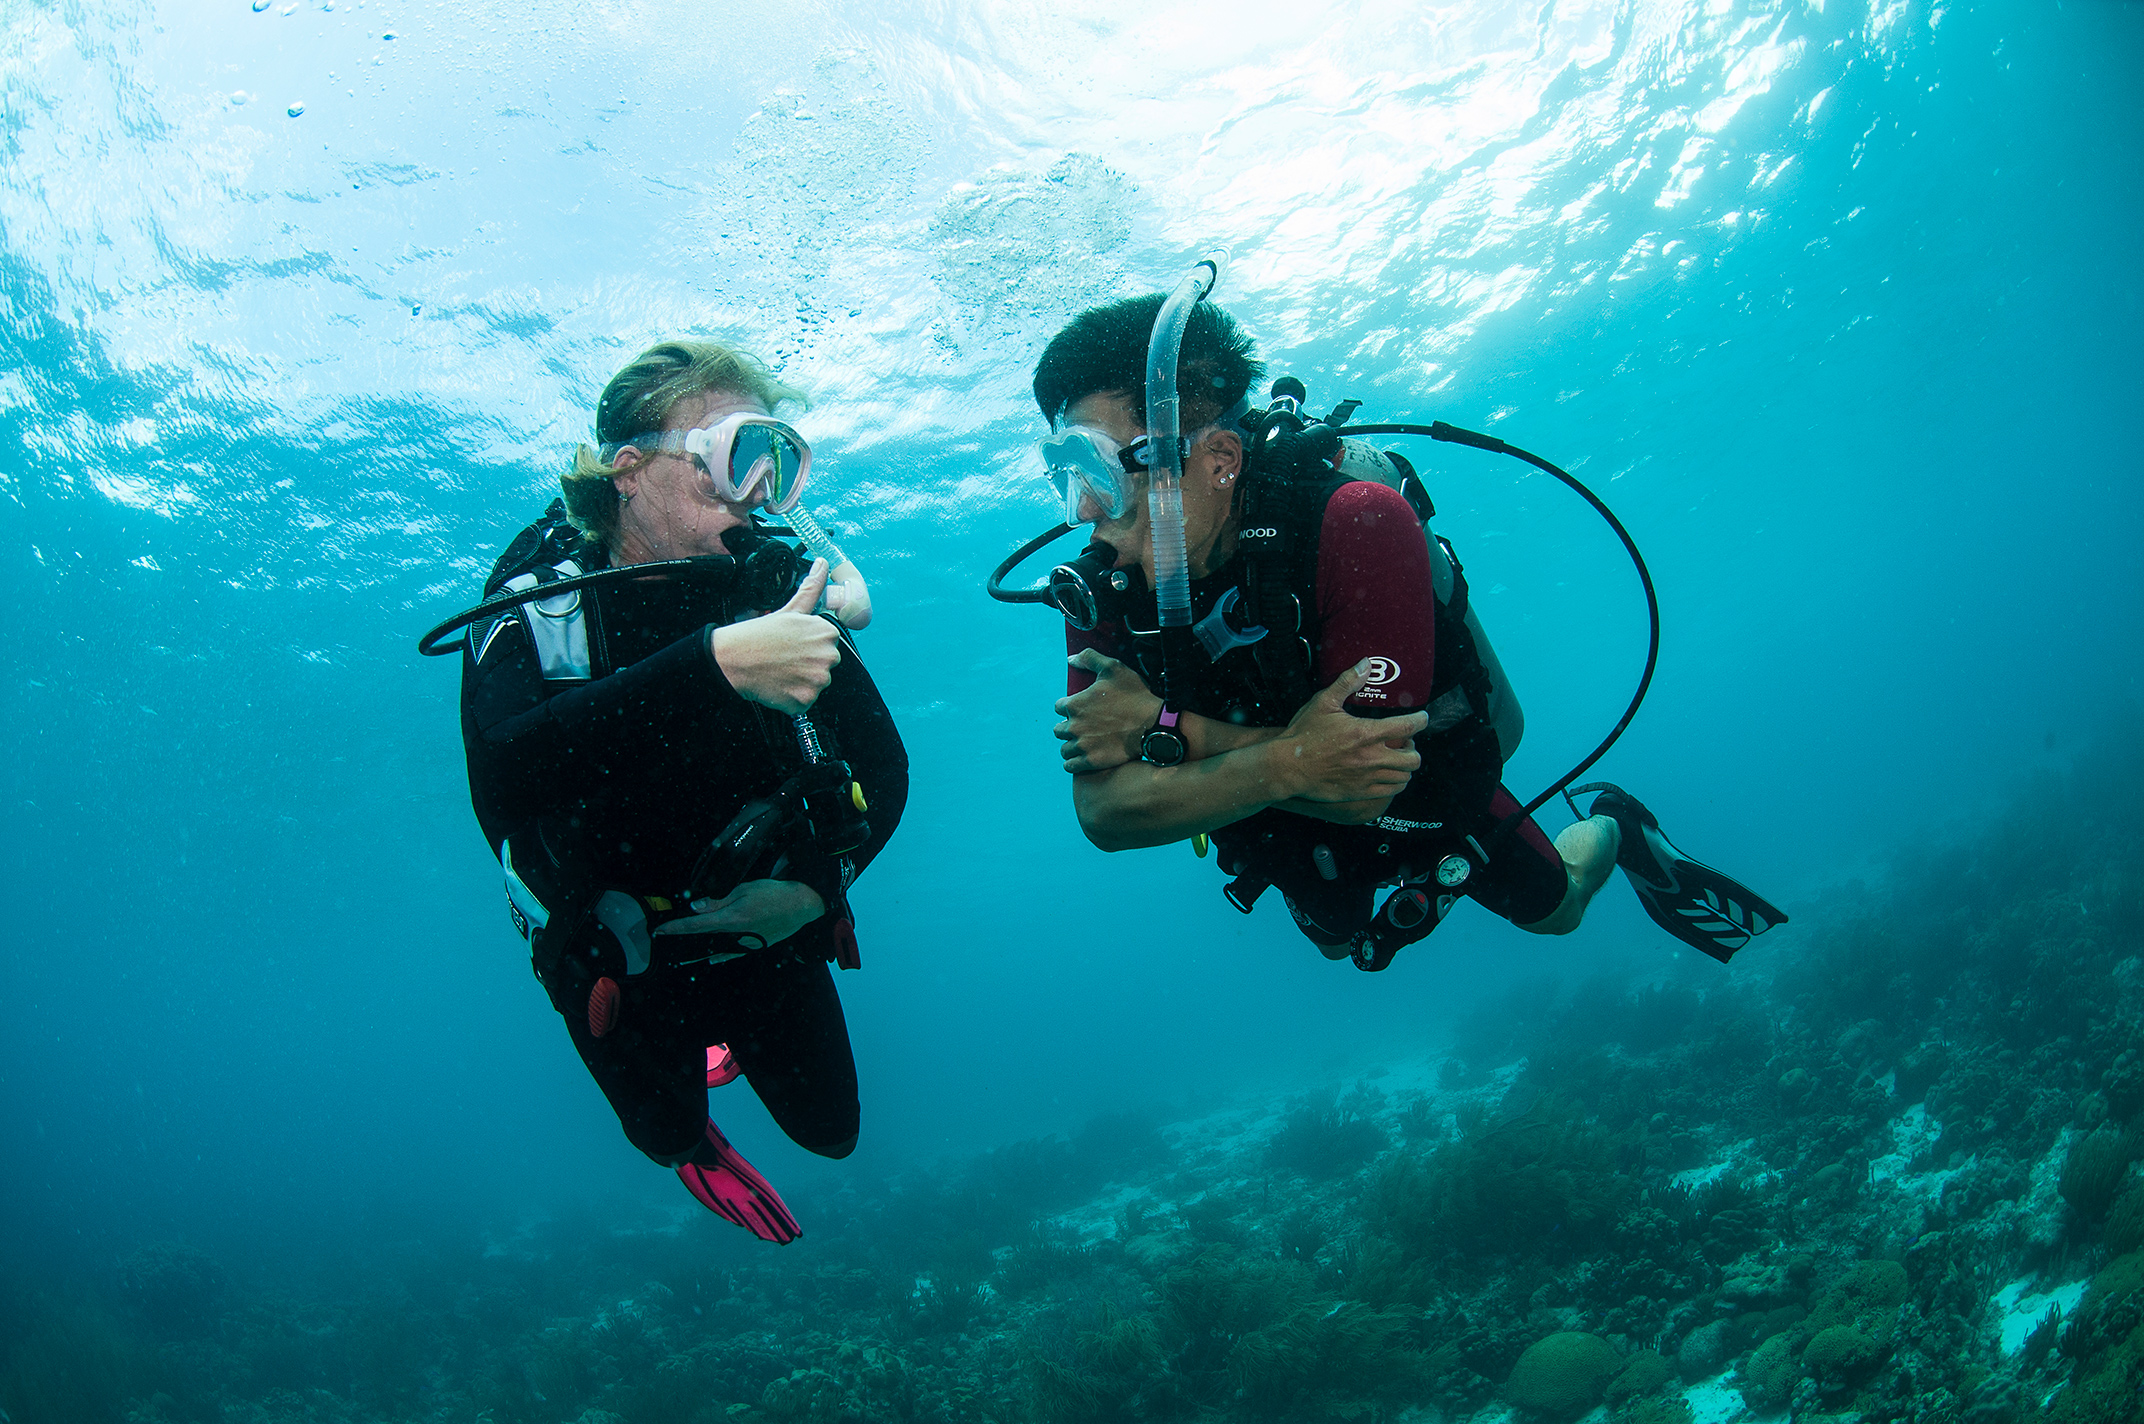 A scuba diver tells their buddy they want to ascend by showing a thumbs up, which is one of the basic hand signals in diving